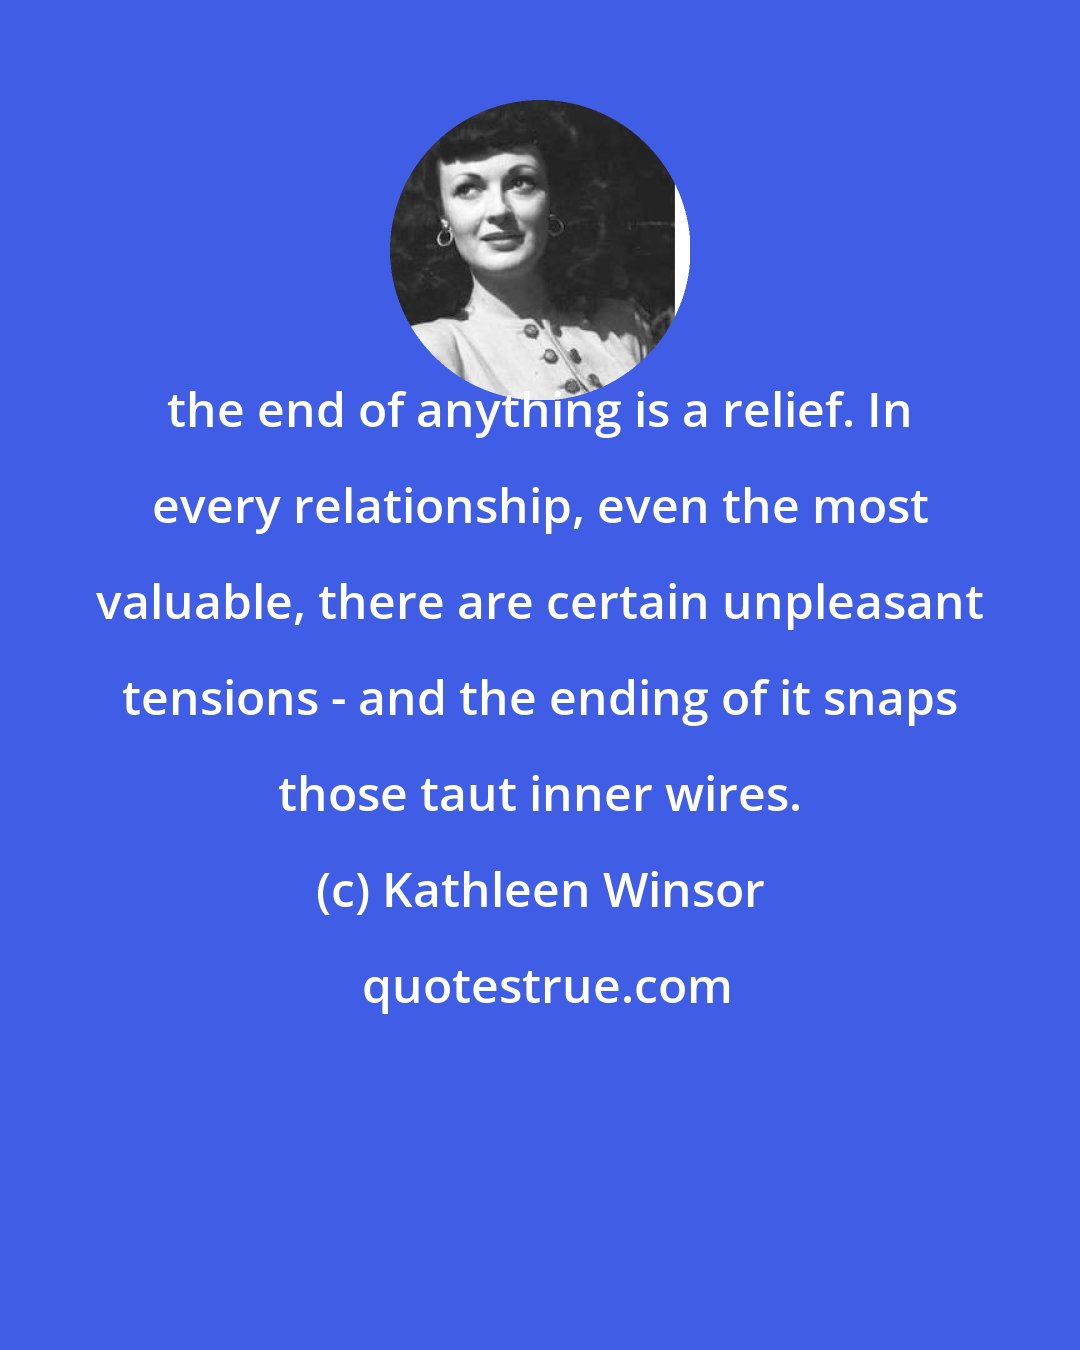 Kathleen Winsor: the end of anything is a relief. In every relationship, even the most valuable, there are certain unpleasant tensions - and the ending of it snaps those taut inner wires.